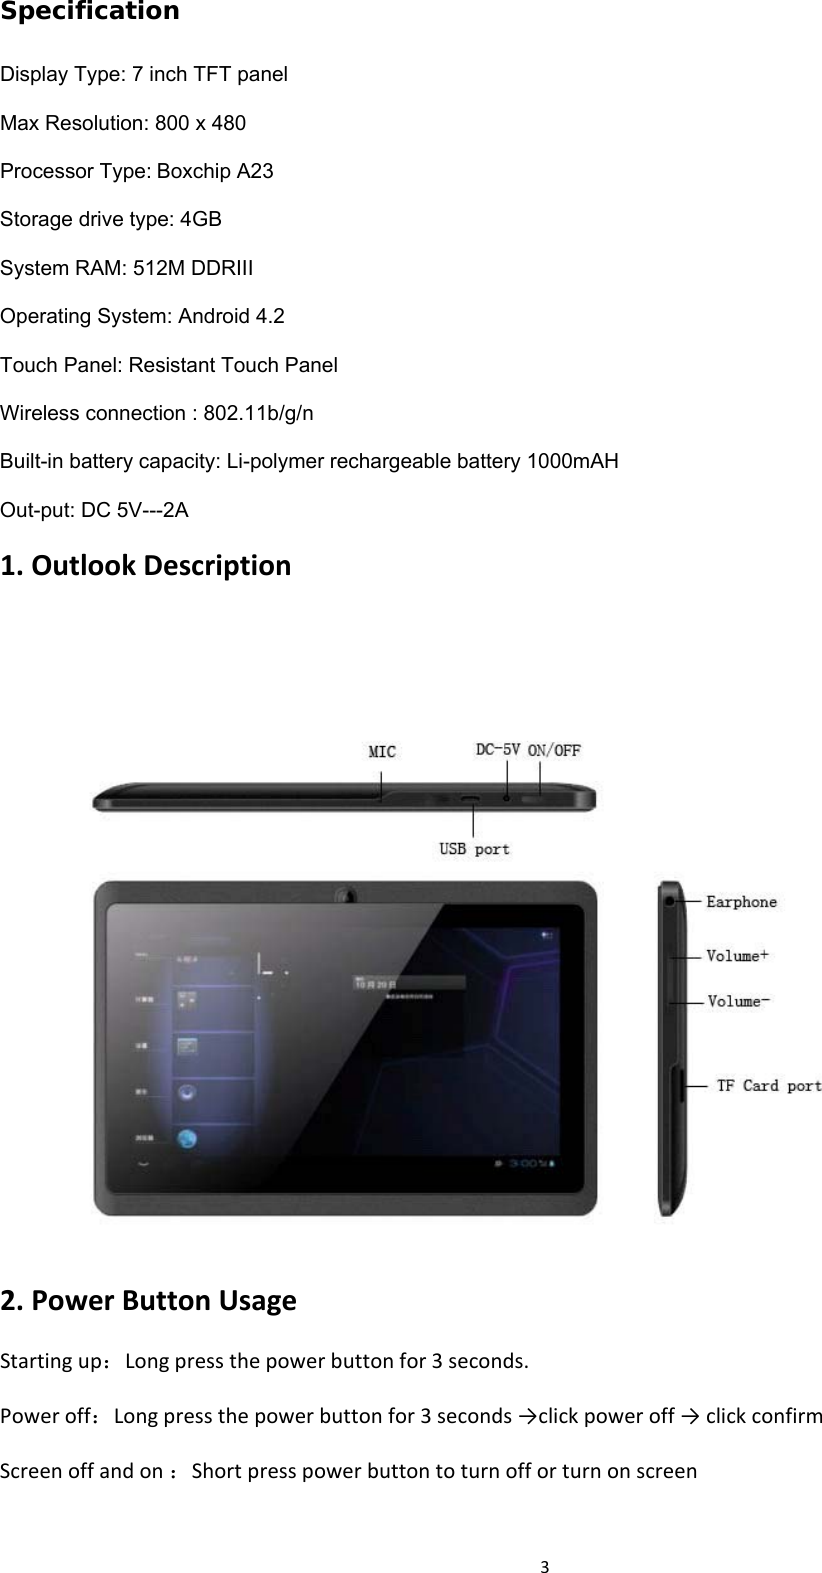 3Specification Display Type: 7 inch TFT panel Max Resolution: 800 x 480 Processor Type:Boxchip A23 Storage drive type: 4GB System RAM: 512M DDRIII Operating System: Android 4.2 Touch Panel: Resistant Touch Panel Wireless connection : 802.11b/g/n Built-in battery capacity: Li-polymer rechargeable battery 1000mAH Out-put: DC 5V---2A 1.OutlookDescription2.PowerButtonUsageStartingup：Longpressthepowerbuttonfor3seconds.Poweroff：Longpressthepowerbuttonfor3seconds→clickpoweroff→clickconfirmScreenoffandon：Shortpresspowerbuttontoturnofforturnonscreen